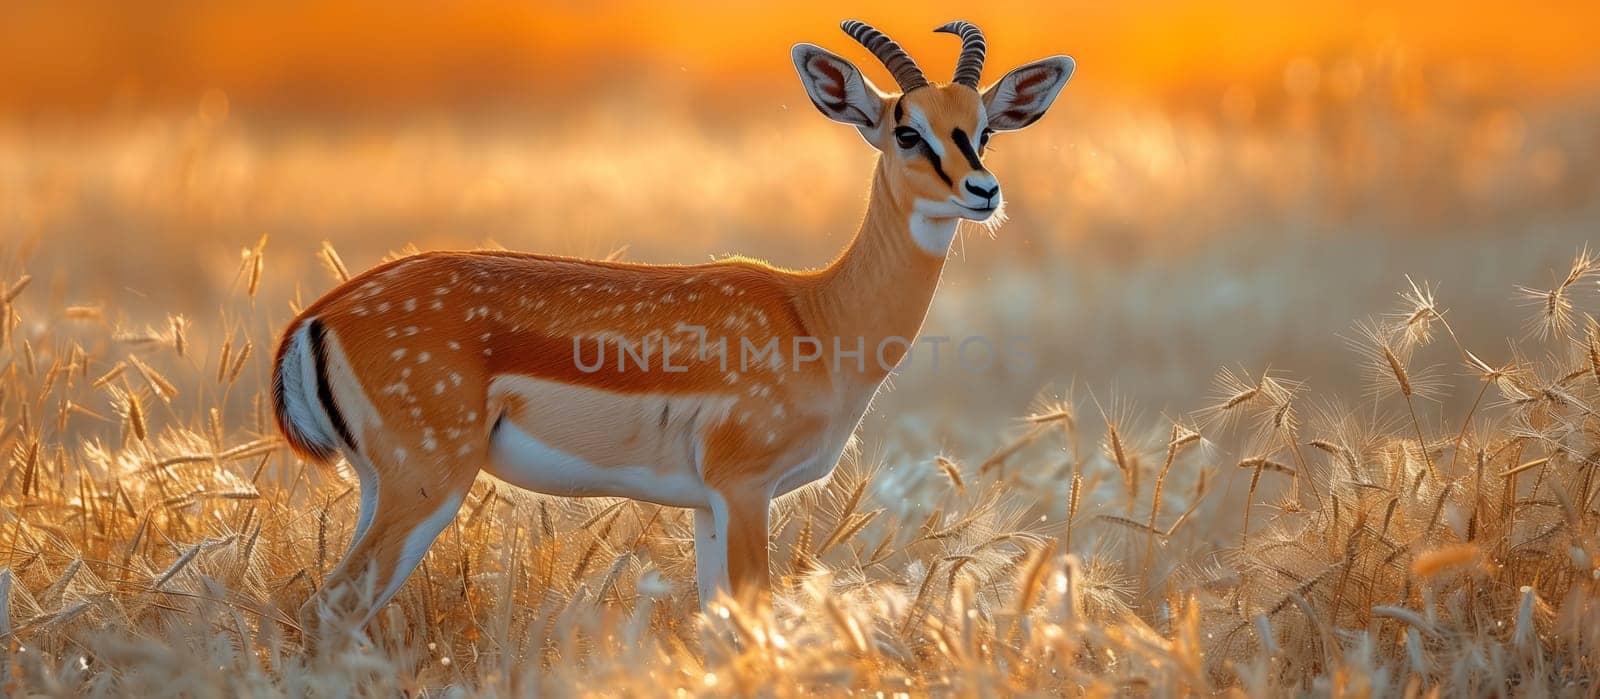 In the grassland ecoregion, a deer with a fawn standing in tall grass, showcasing terrestrial animal adaptation in their natural landscape with their snouts grazing on the grass